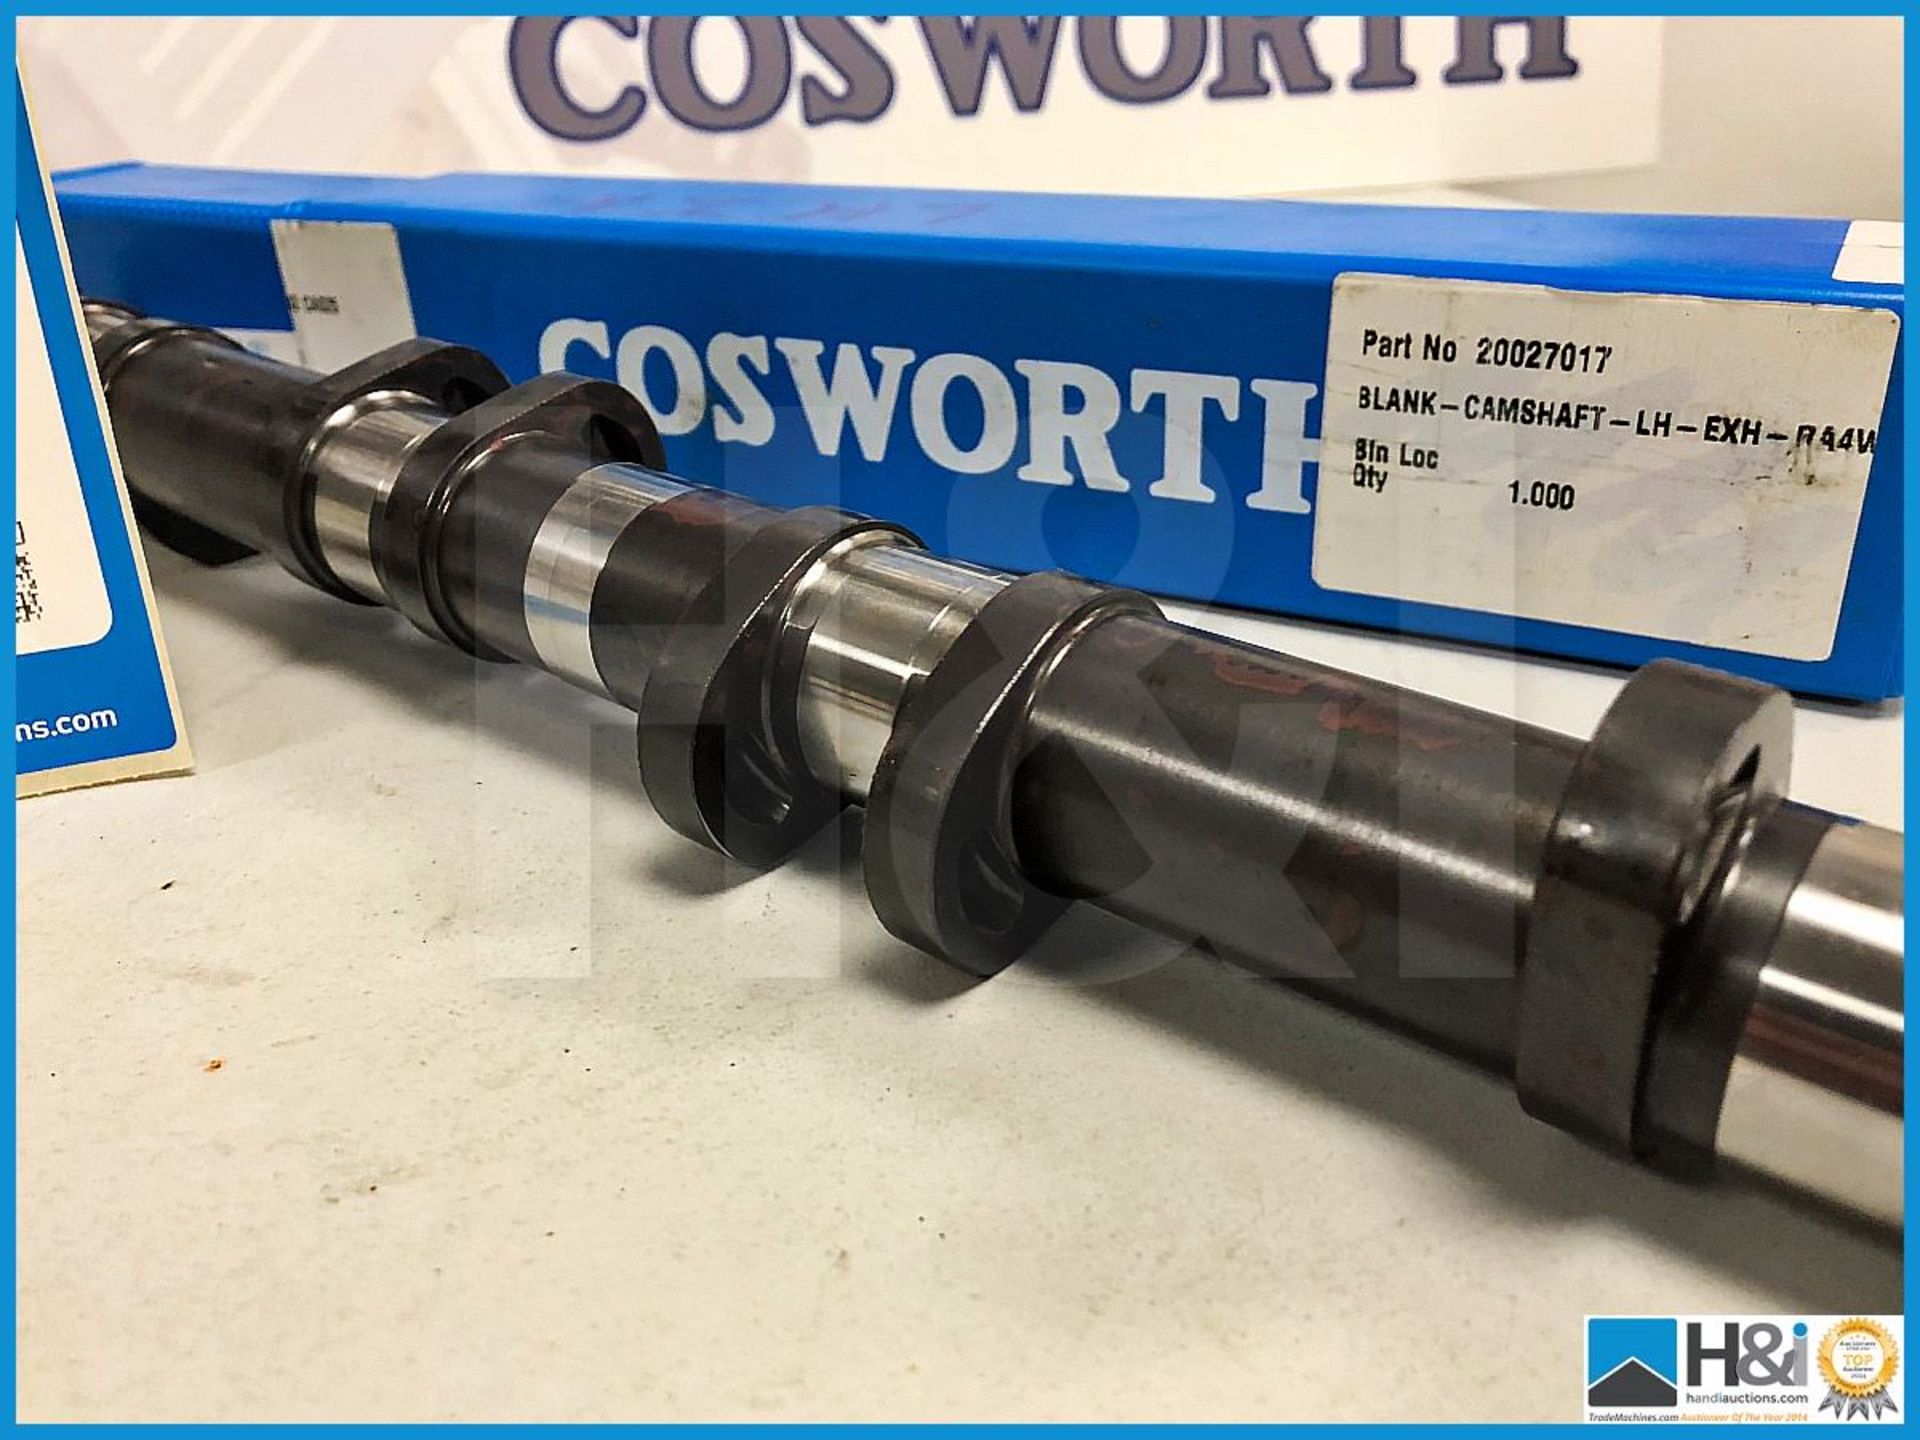 5 x Cosworth bank camshaft LH exhaust RA4W. Code: 20027017. Lot 8. RRP GBP 4,500 - Image 2 of 2